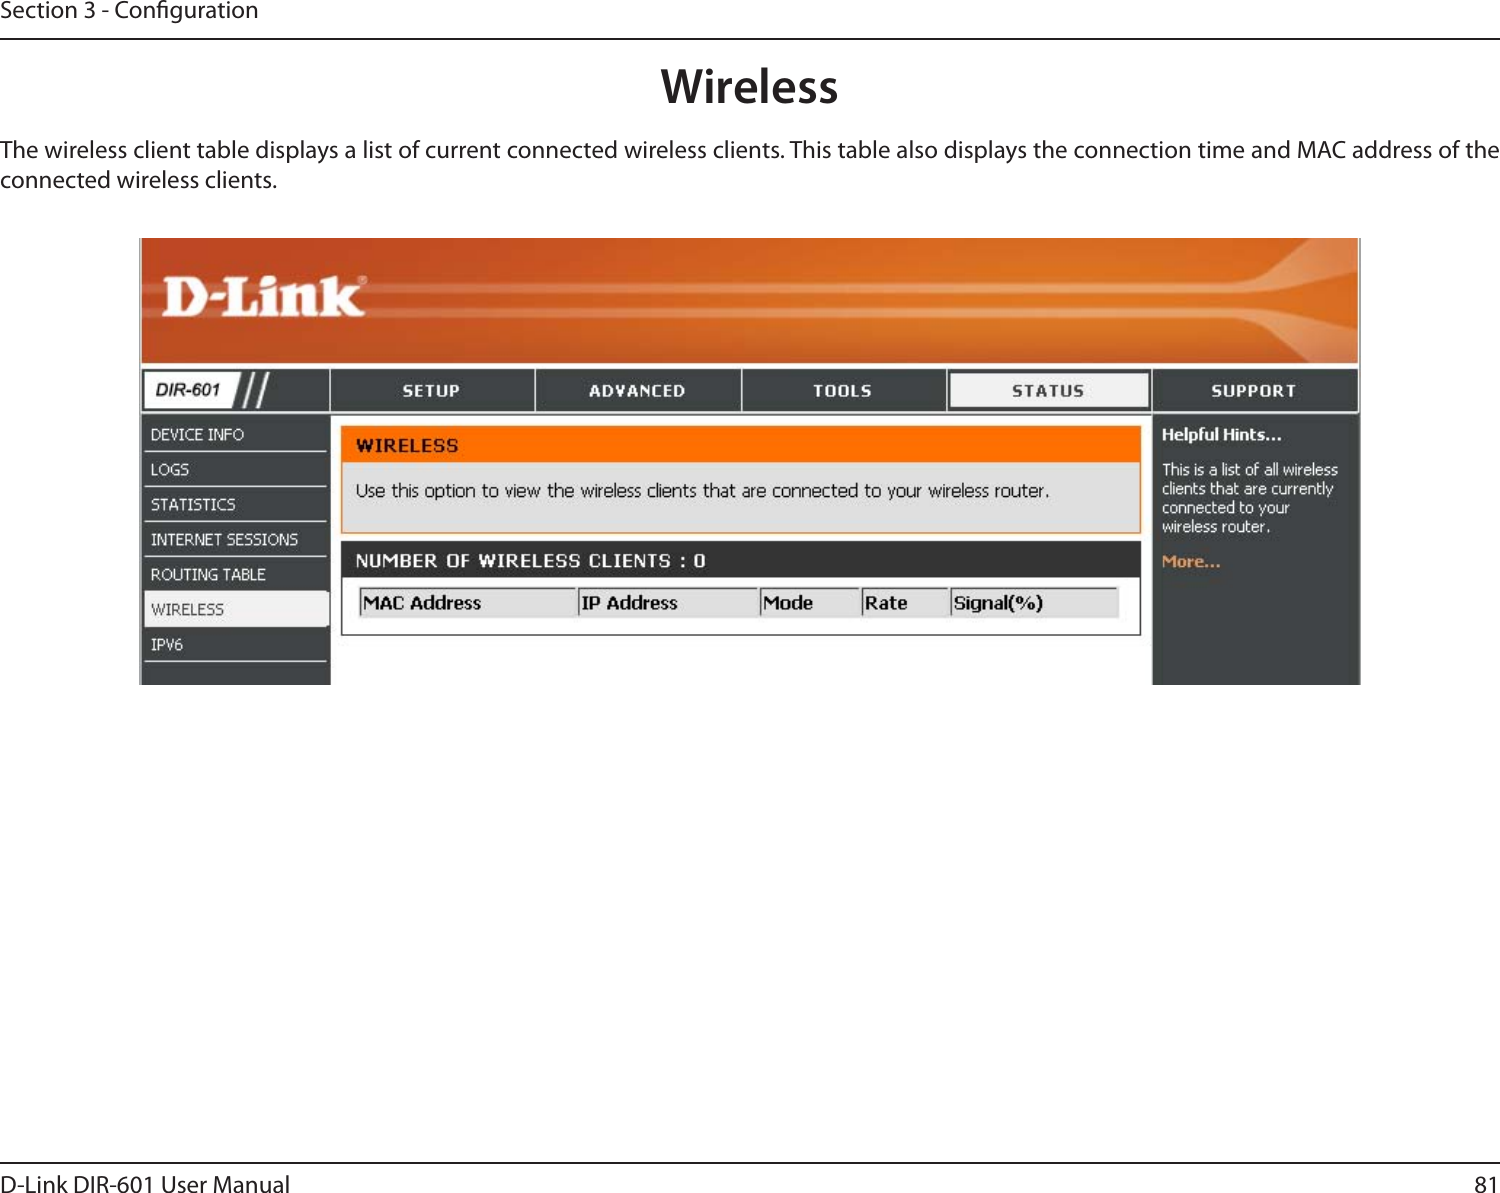 81D-Link DIR-601 User ManualSection 3 - CongurationThe wireless client table displays a list of current connected wireless clients. This table also displays the connection time and MAC address of the connected wireless clients.Wireless